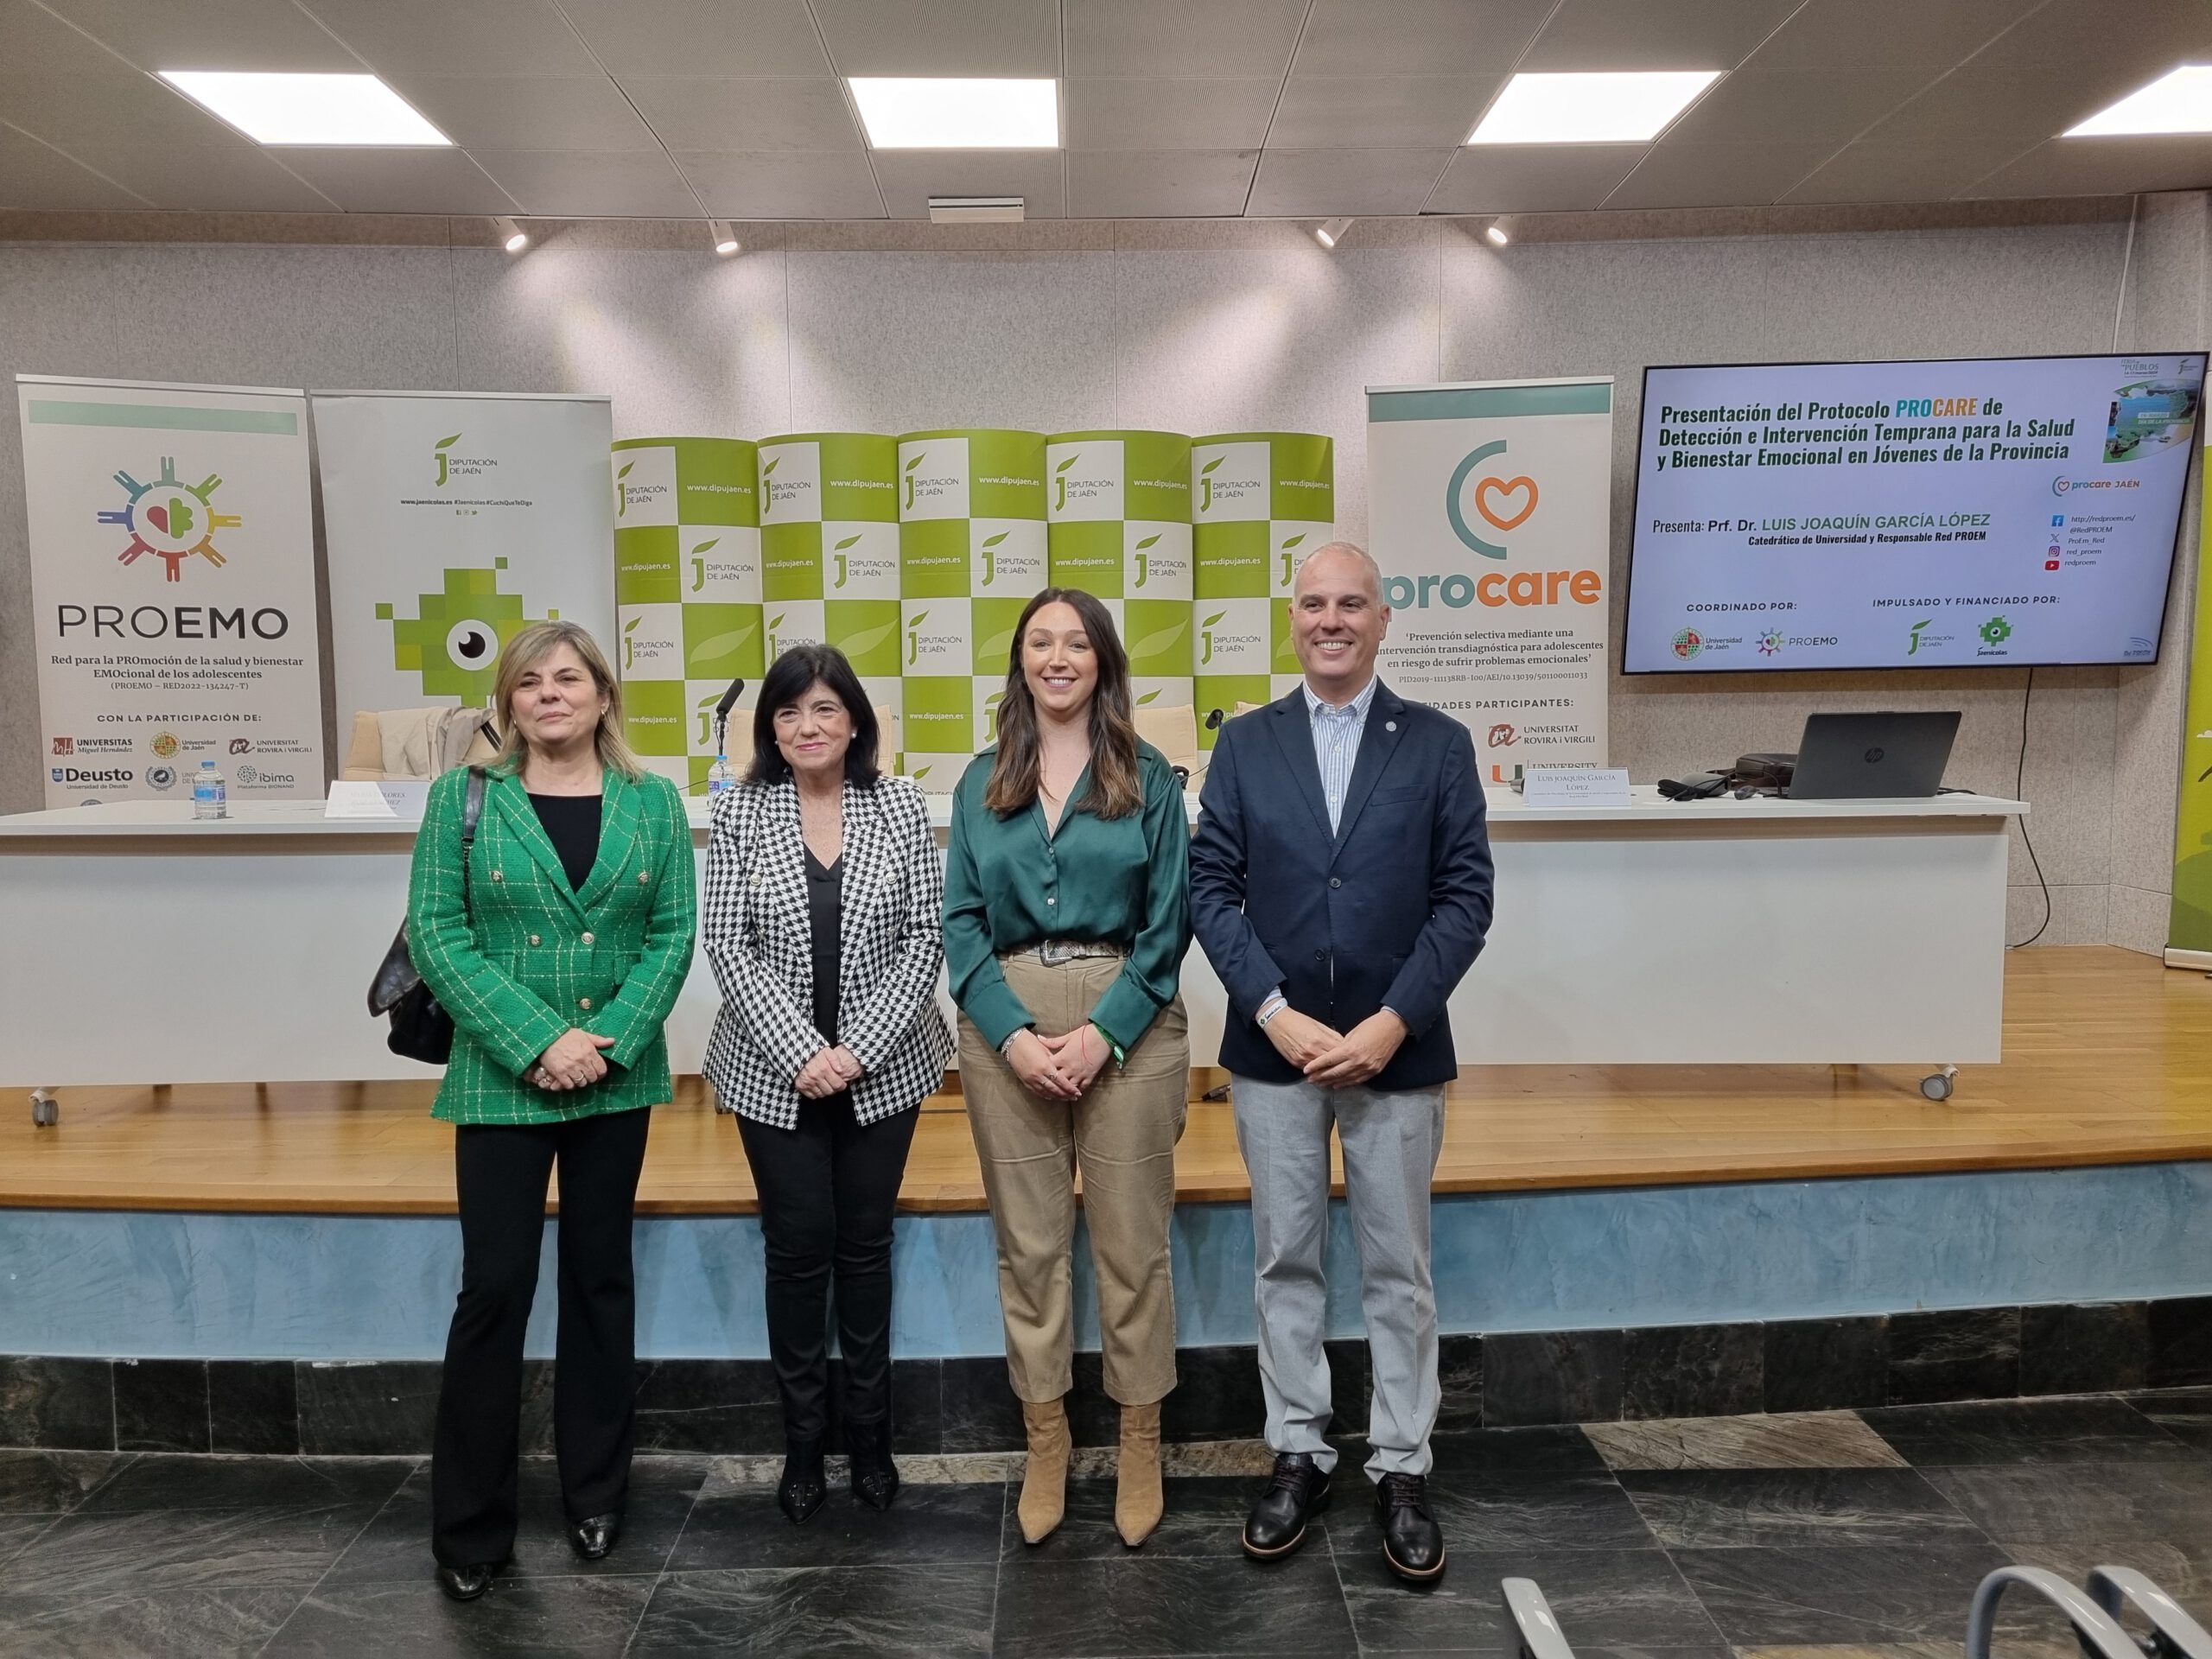 The University of Jaén and the PROEMO Network will implement the PROCARE initiative to improve the health and emotional well-being of adolescents in the province of Jaén.